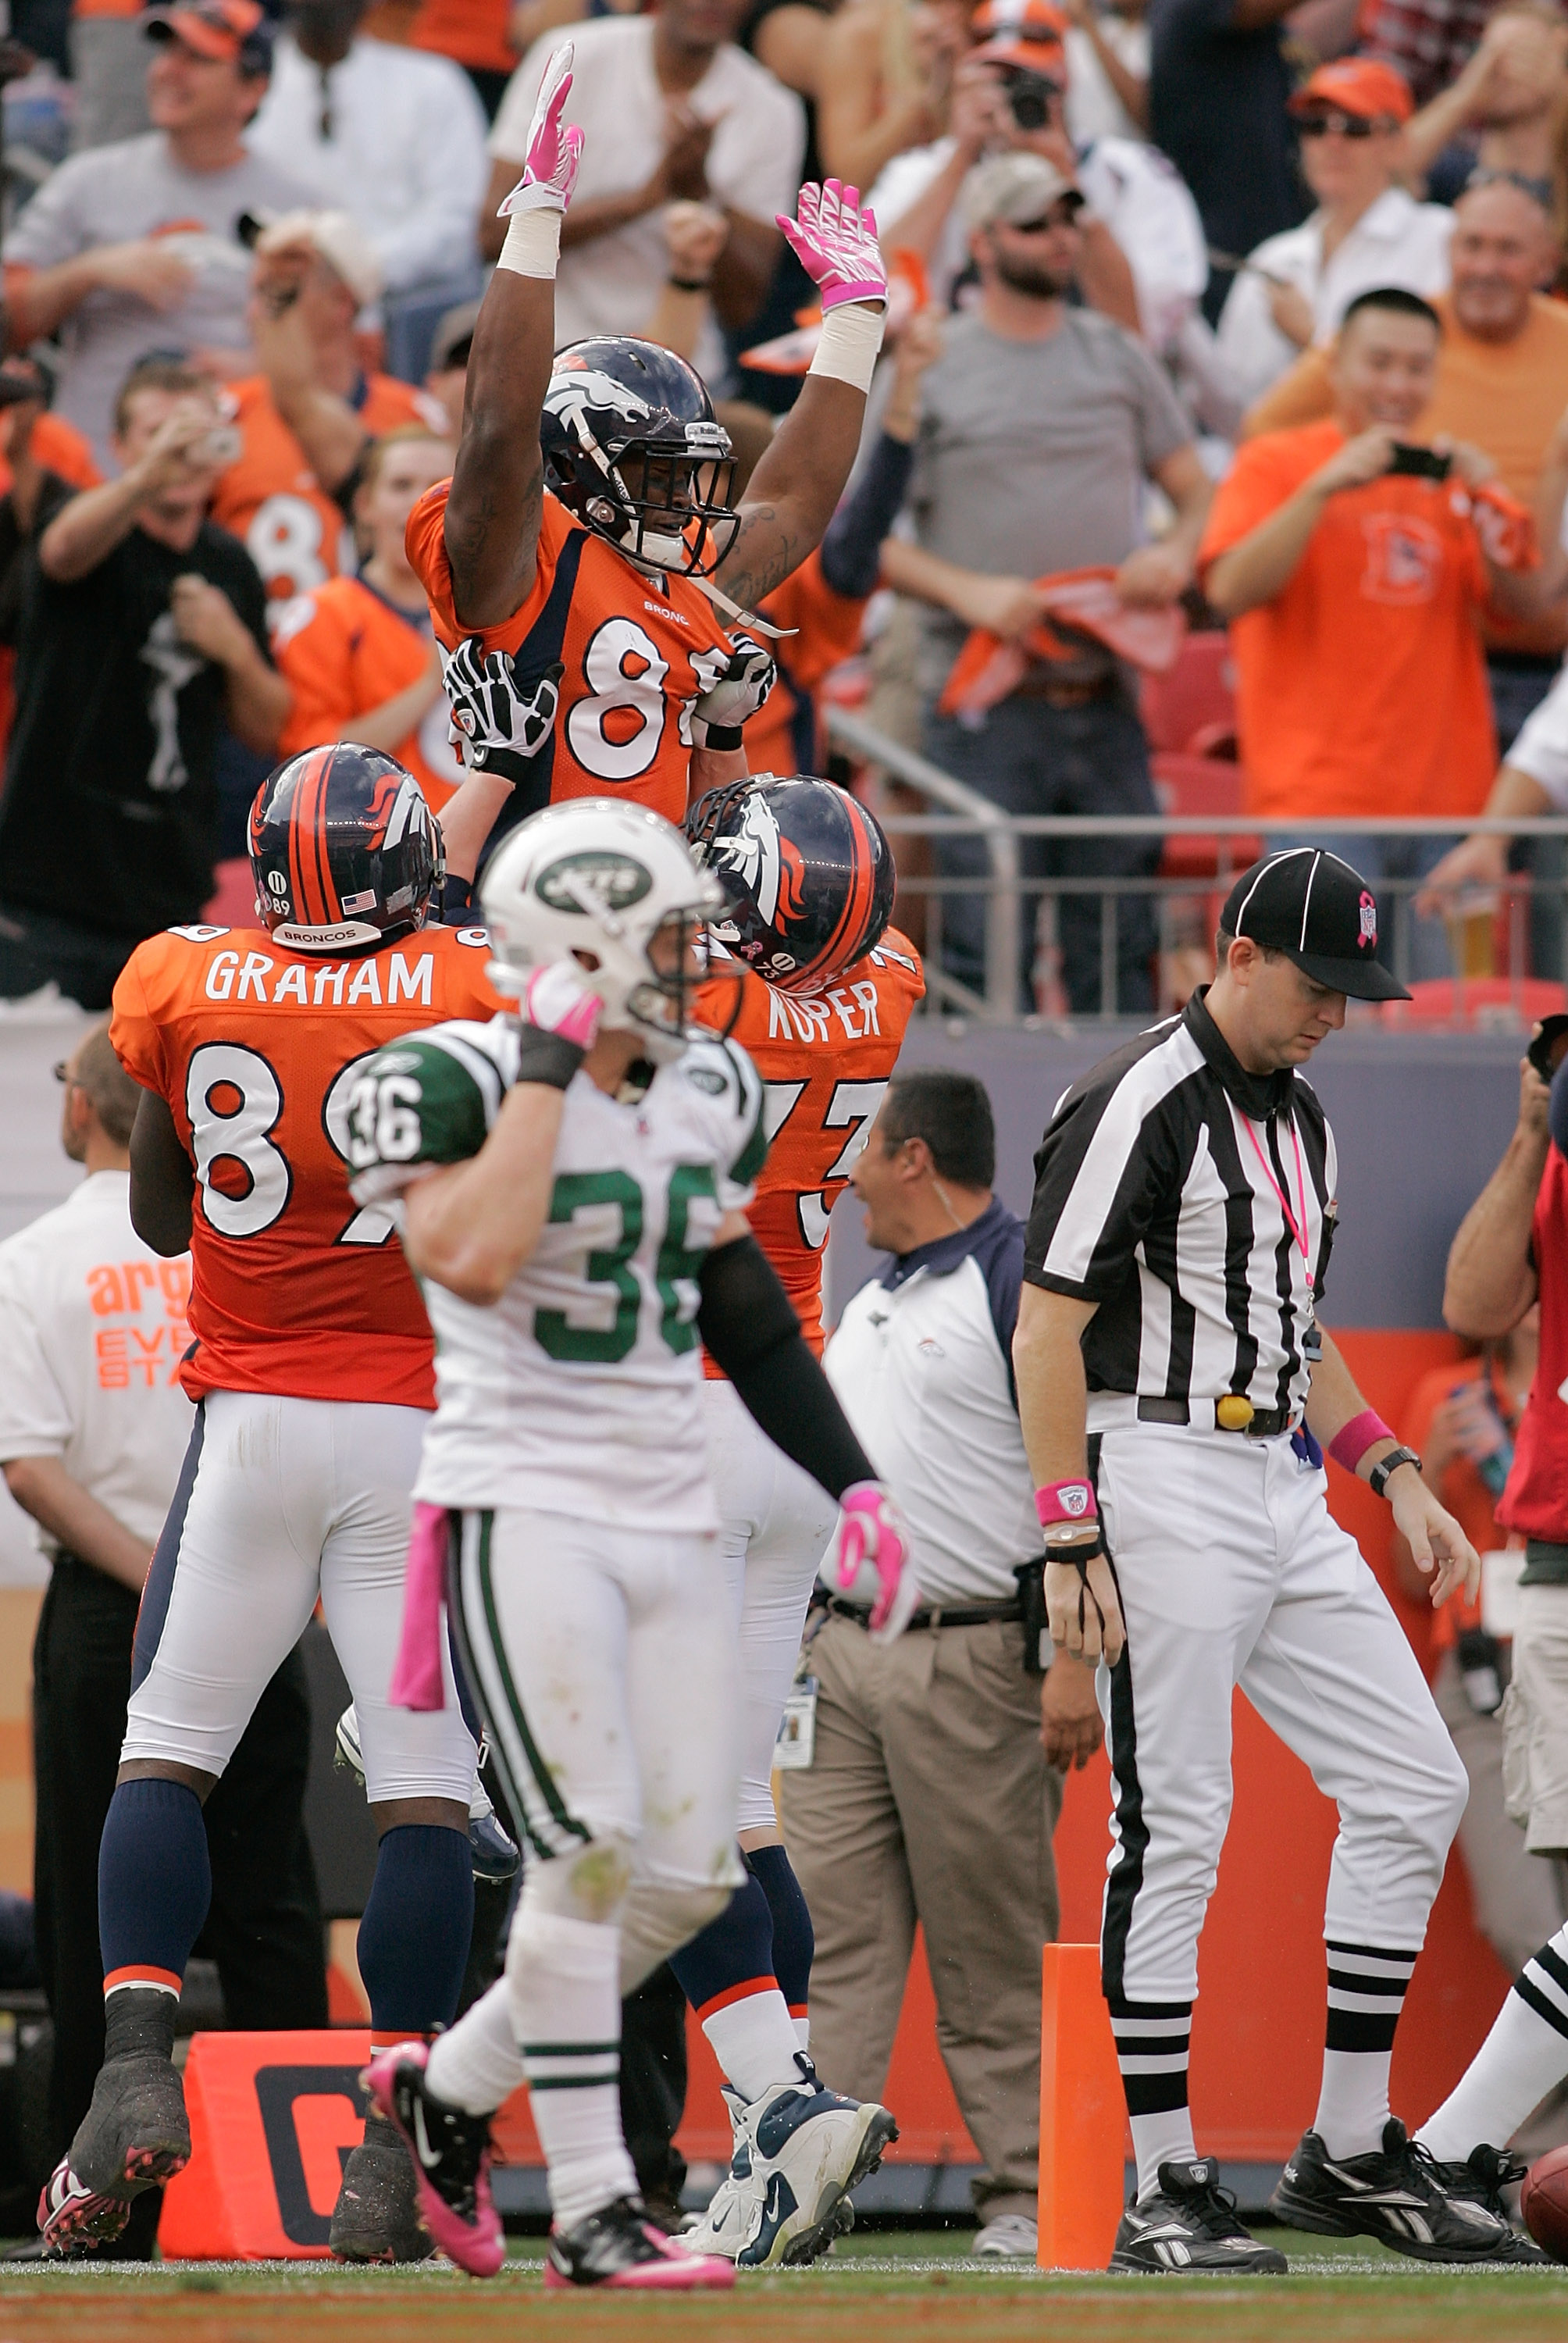 DENVER - OCTOBER 17:  Wide receiver Demaryius Thomas #88 of the Denver Broncos celebrates his touchdown with teammates Daniel Graham #89 and Chris Kuper #73 as safety Jim Leonhard #36 the New York Jets walks off at INVESCO Field at Mile High on October 17